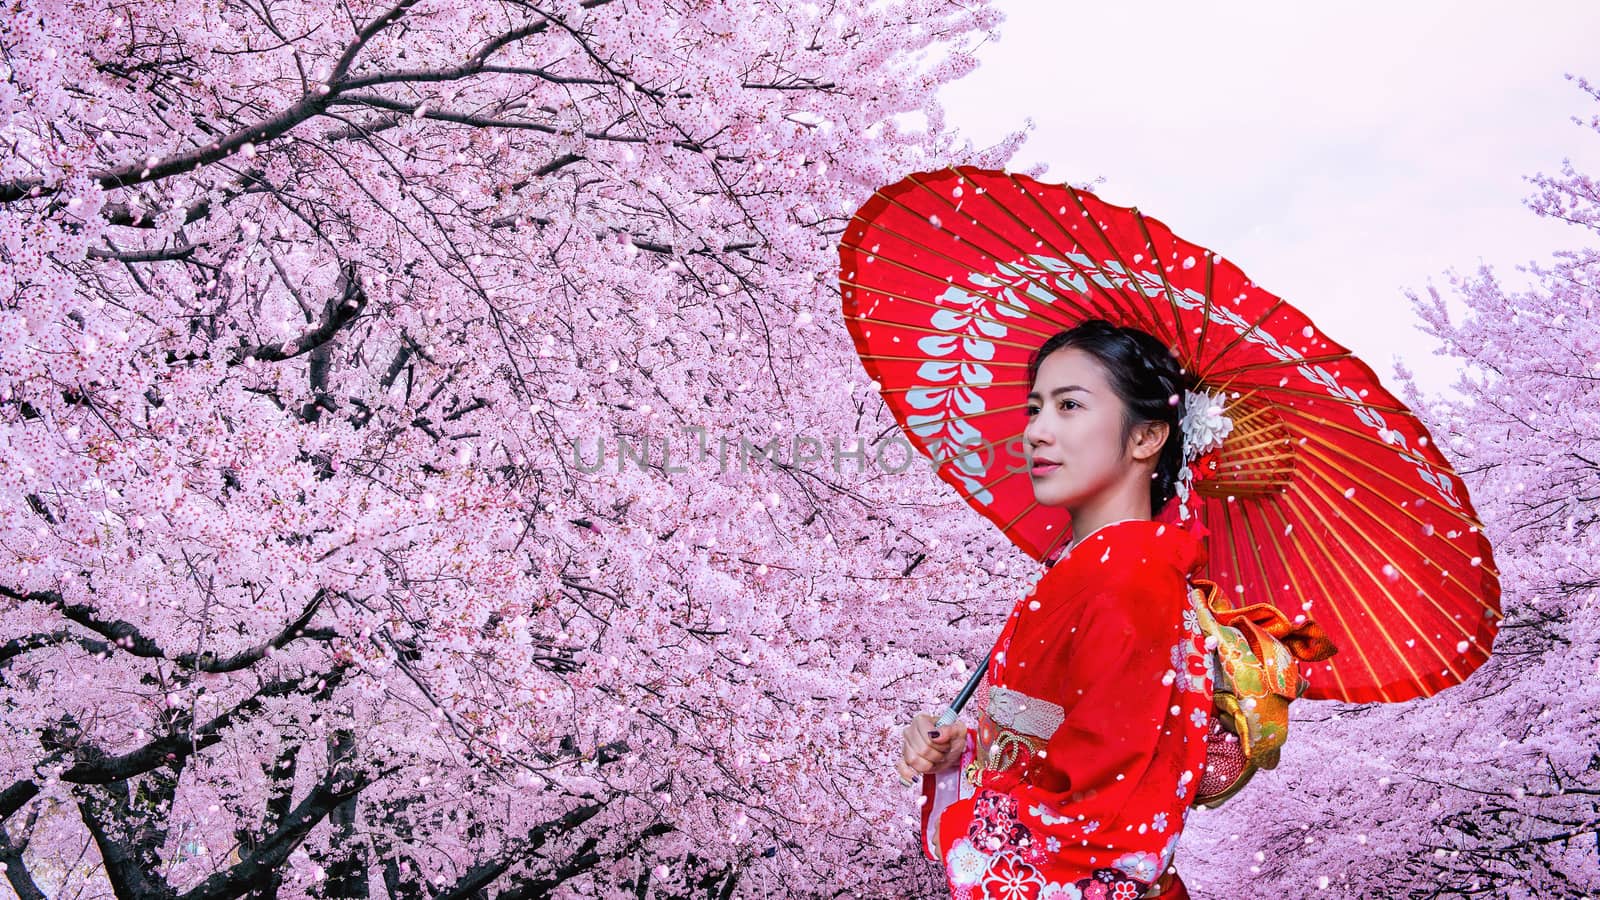 Asian woman wearing japanese traditional kimono and cherry blossom in spring, Japan.